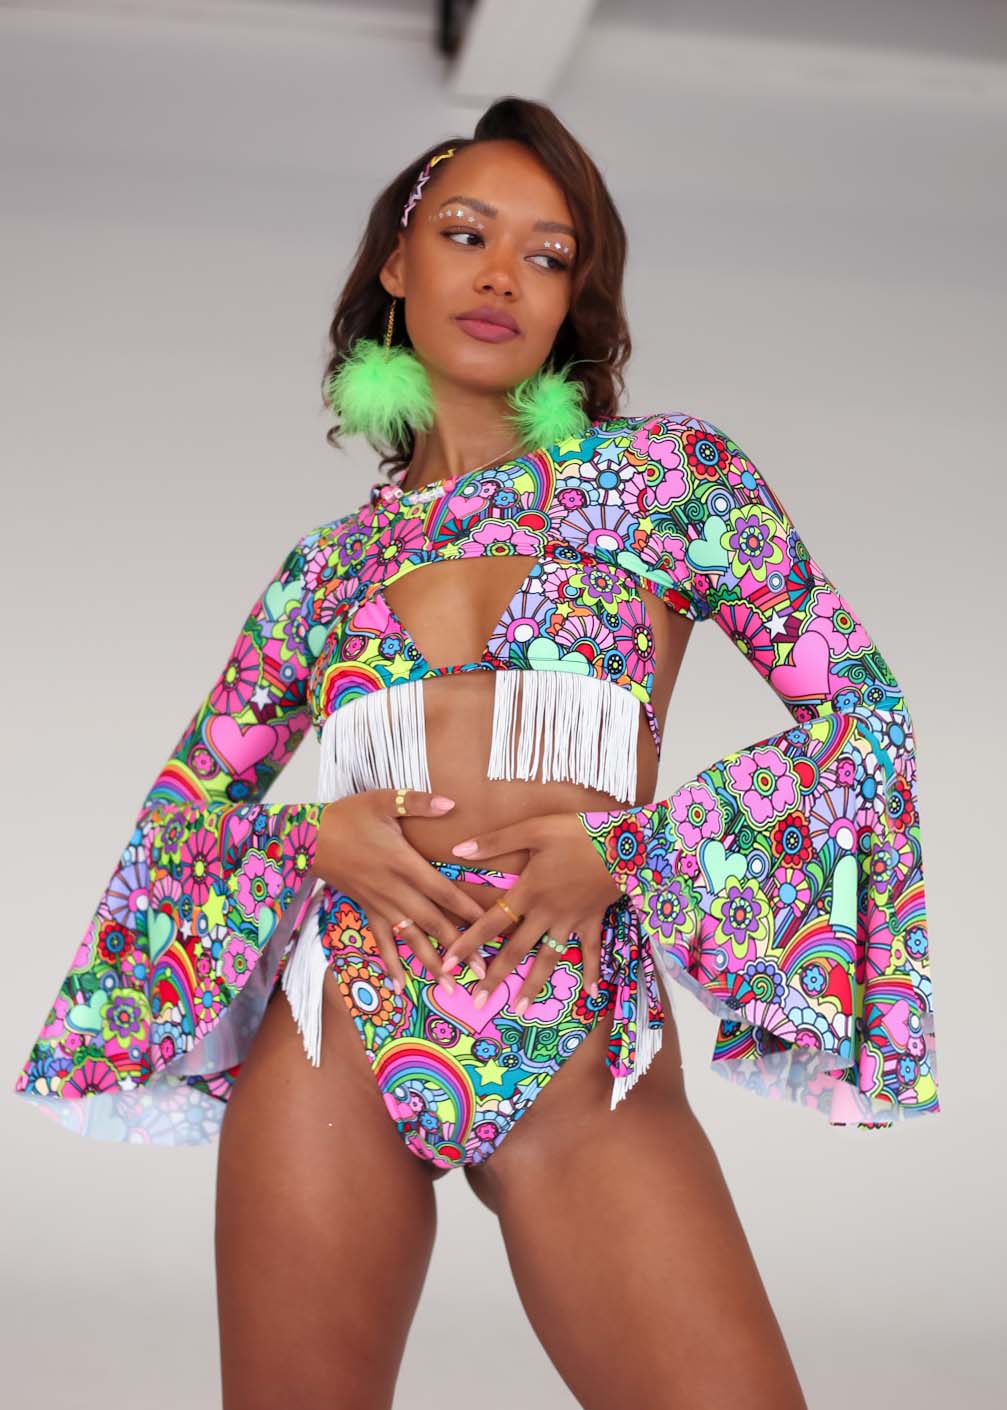 Trippin Daisies Fringe Triangle Top and Trippin Daisies Fringed Thong Bottoms